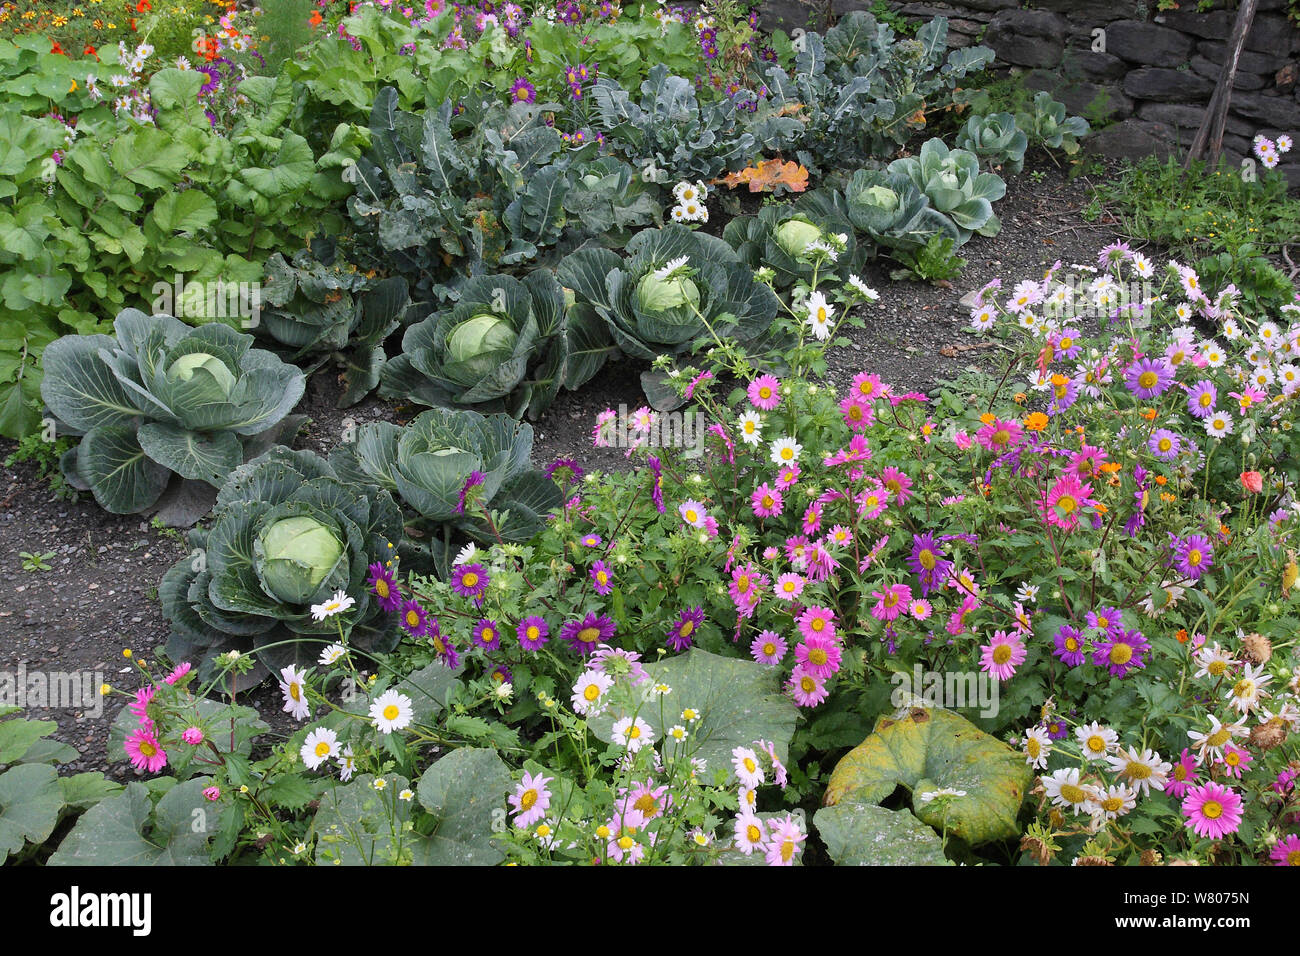 Cabbage plants (Brassica oleracea capita) growing in a garden with flowers, Cevennes, Lozere, France, October. Stock Photo